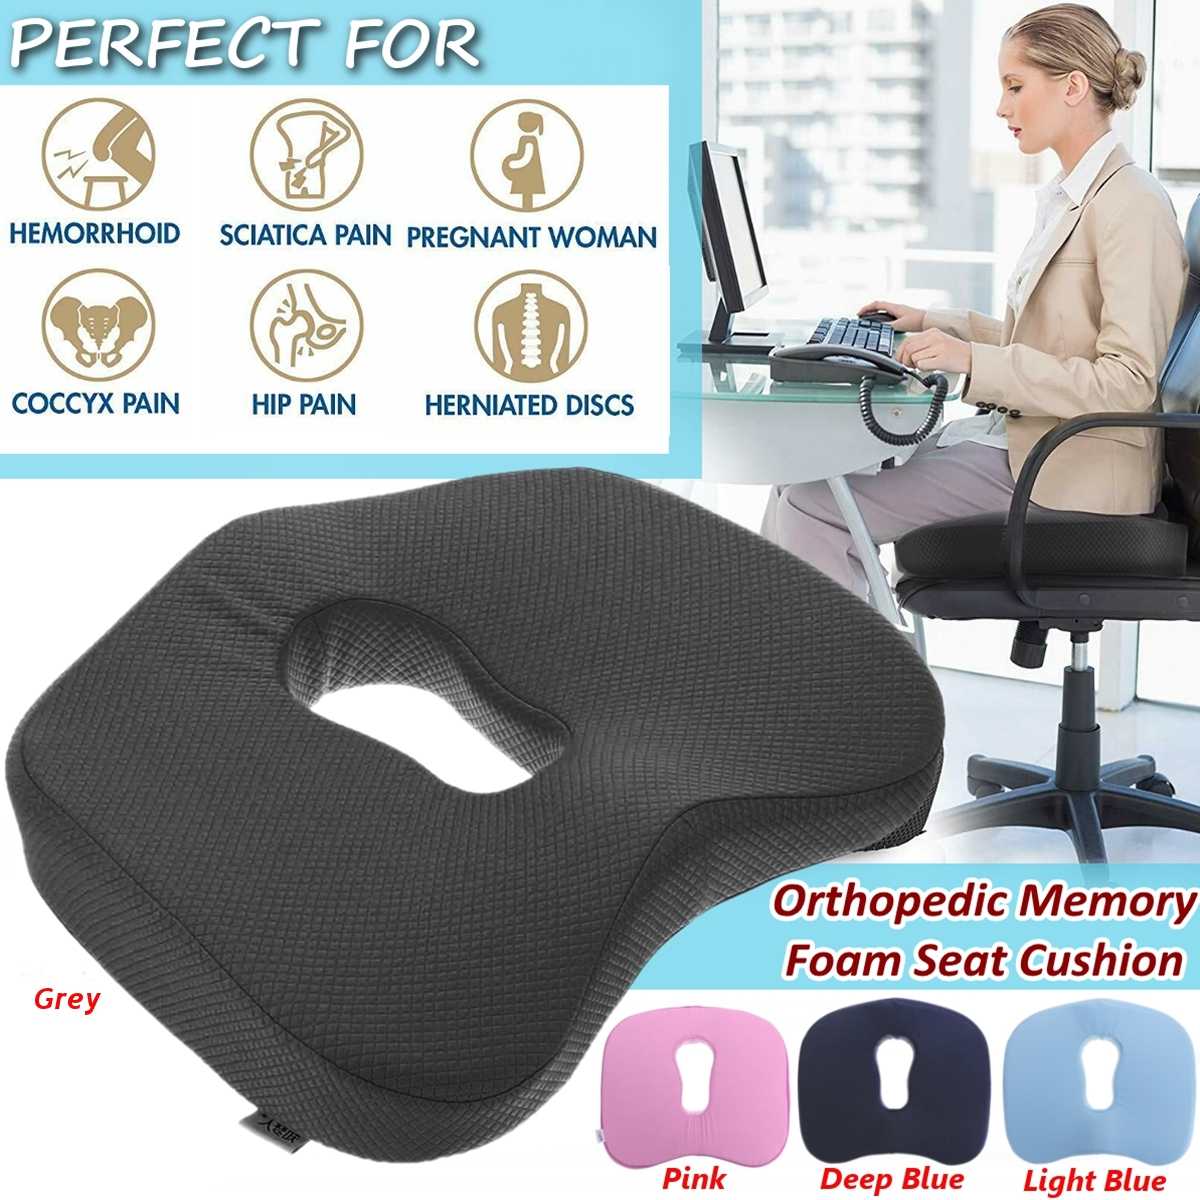 Non-Slip Orthopedic Memory Foam Seat Cushion for Office Chair Car Wheelchair Back Support Sciatica Coccyx Tailbone Pain Relief